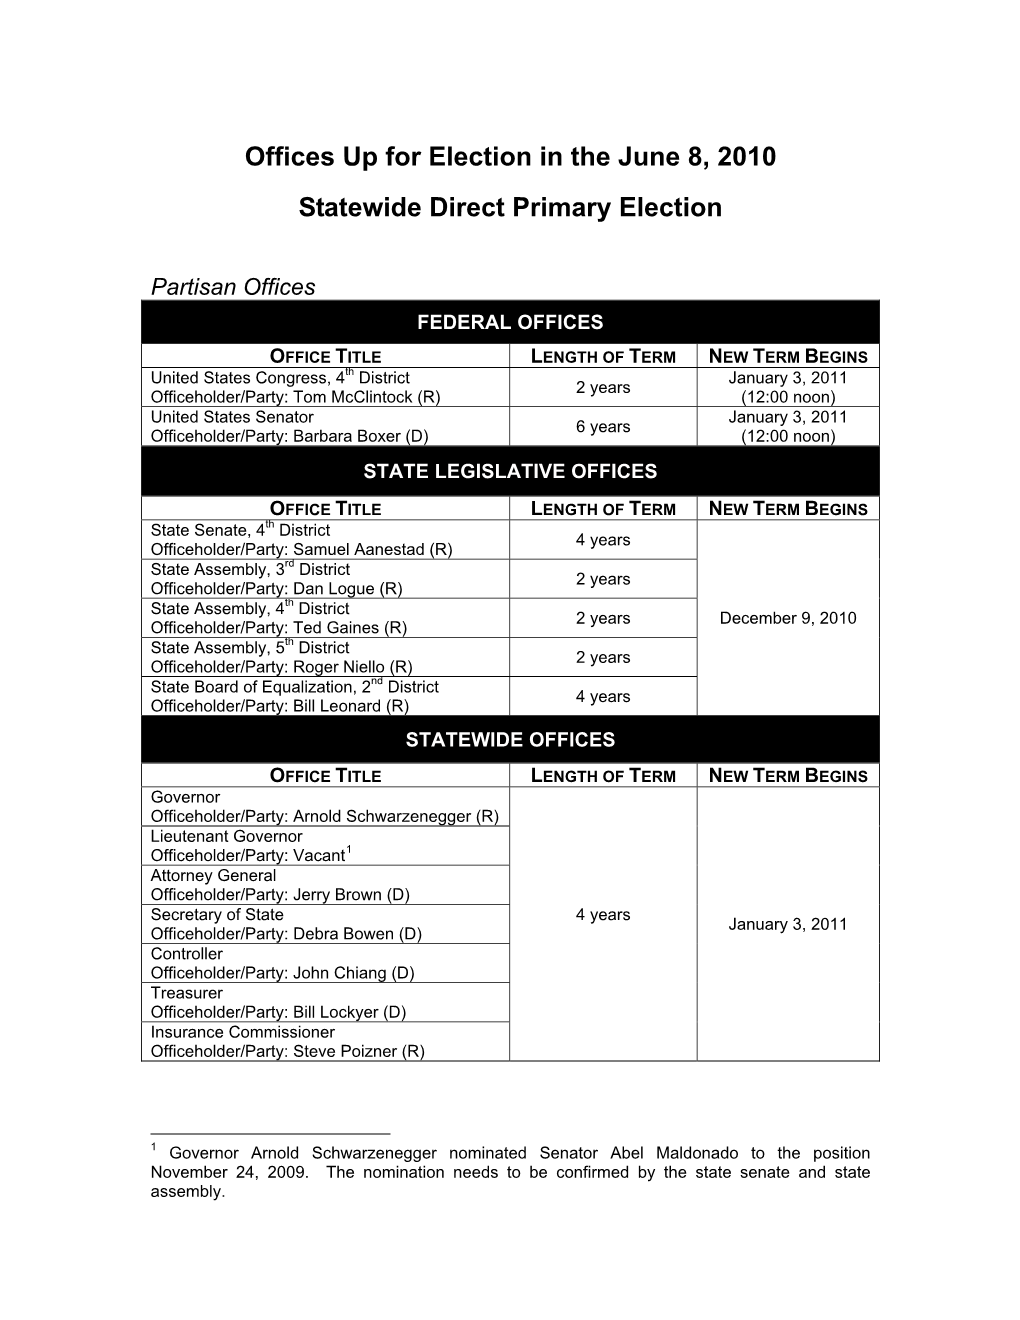 Offices up for Election in the June 8, 2010 Statewide Direct Primary Election